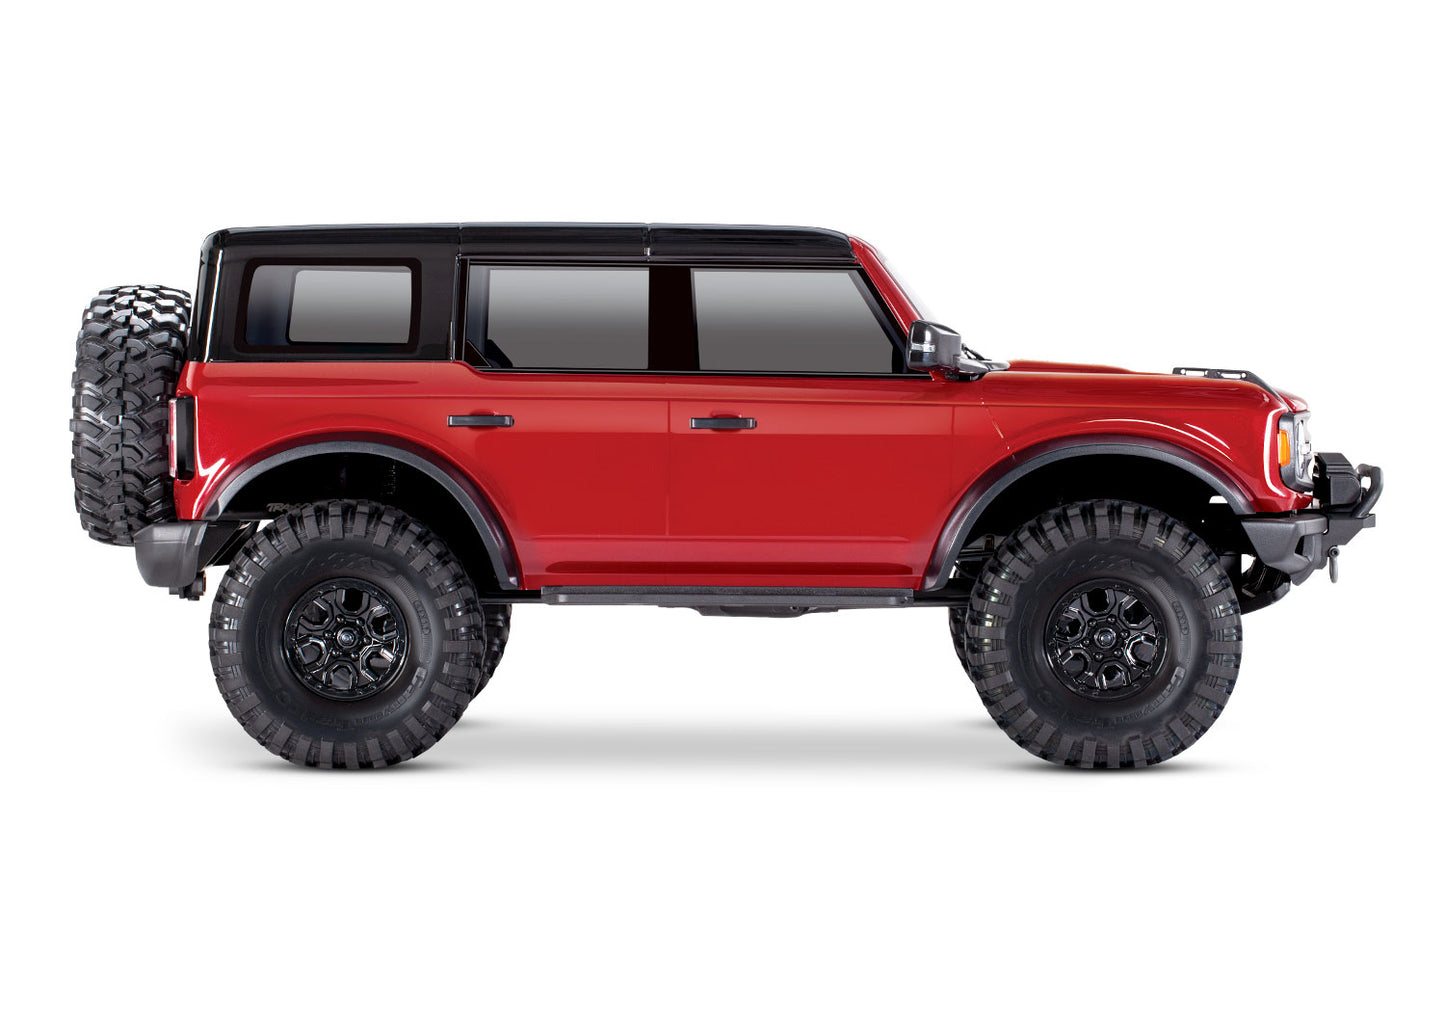 Traxxas TRX4 Scale and Trail 2021 Ford Bronco 1/10 Crawler, XL-5 HV, Titan 12T - Red